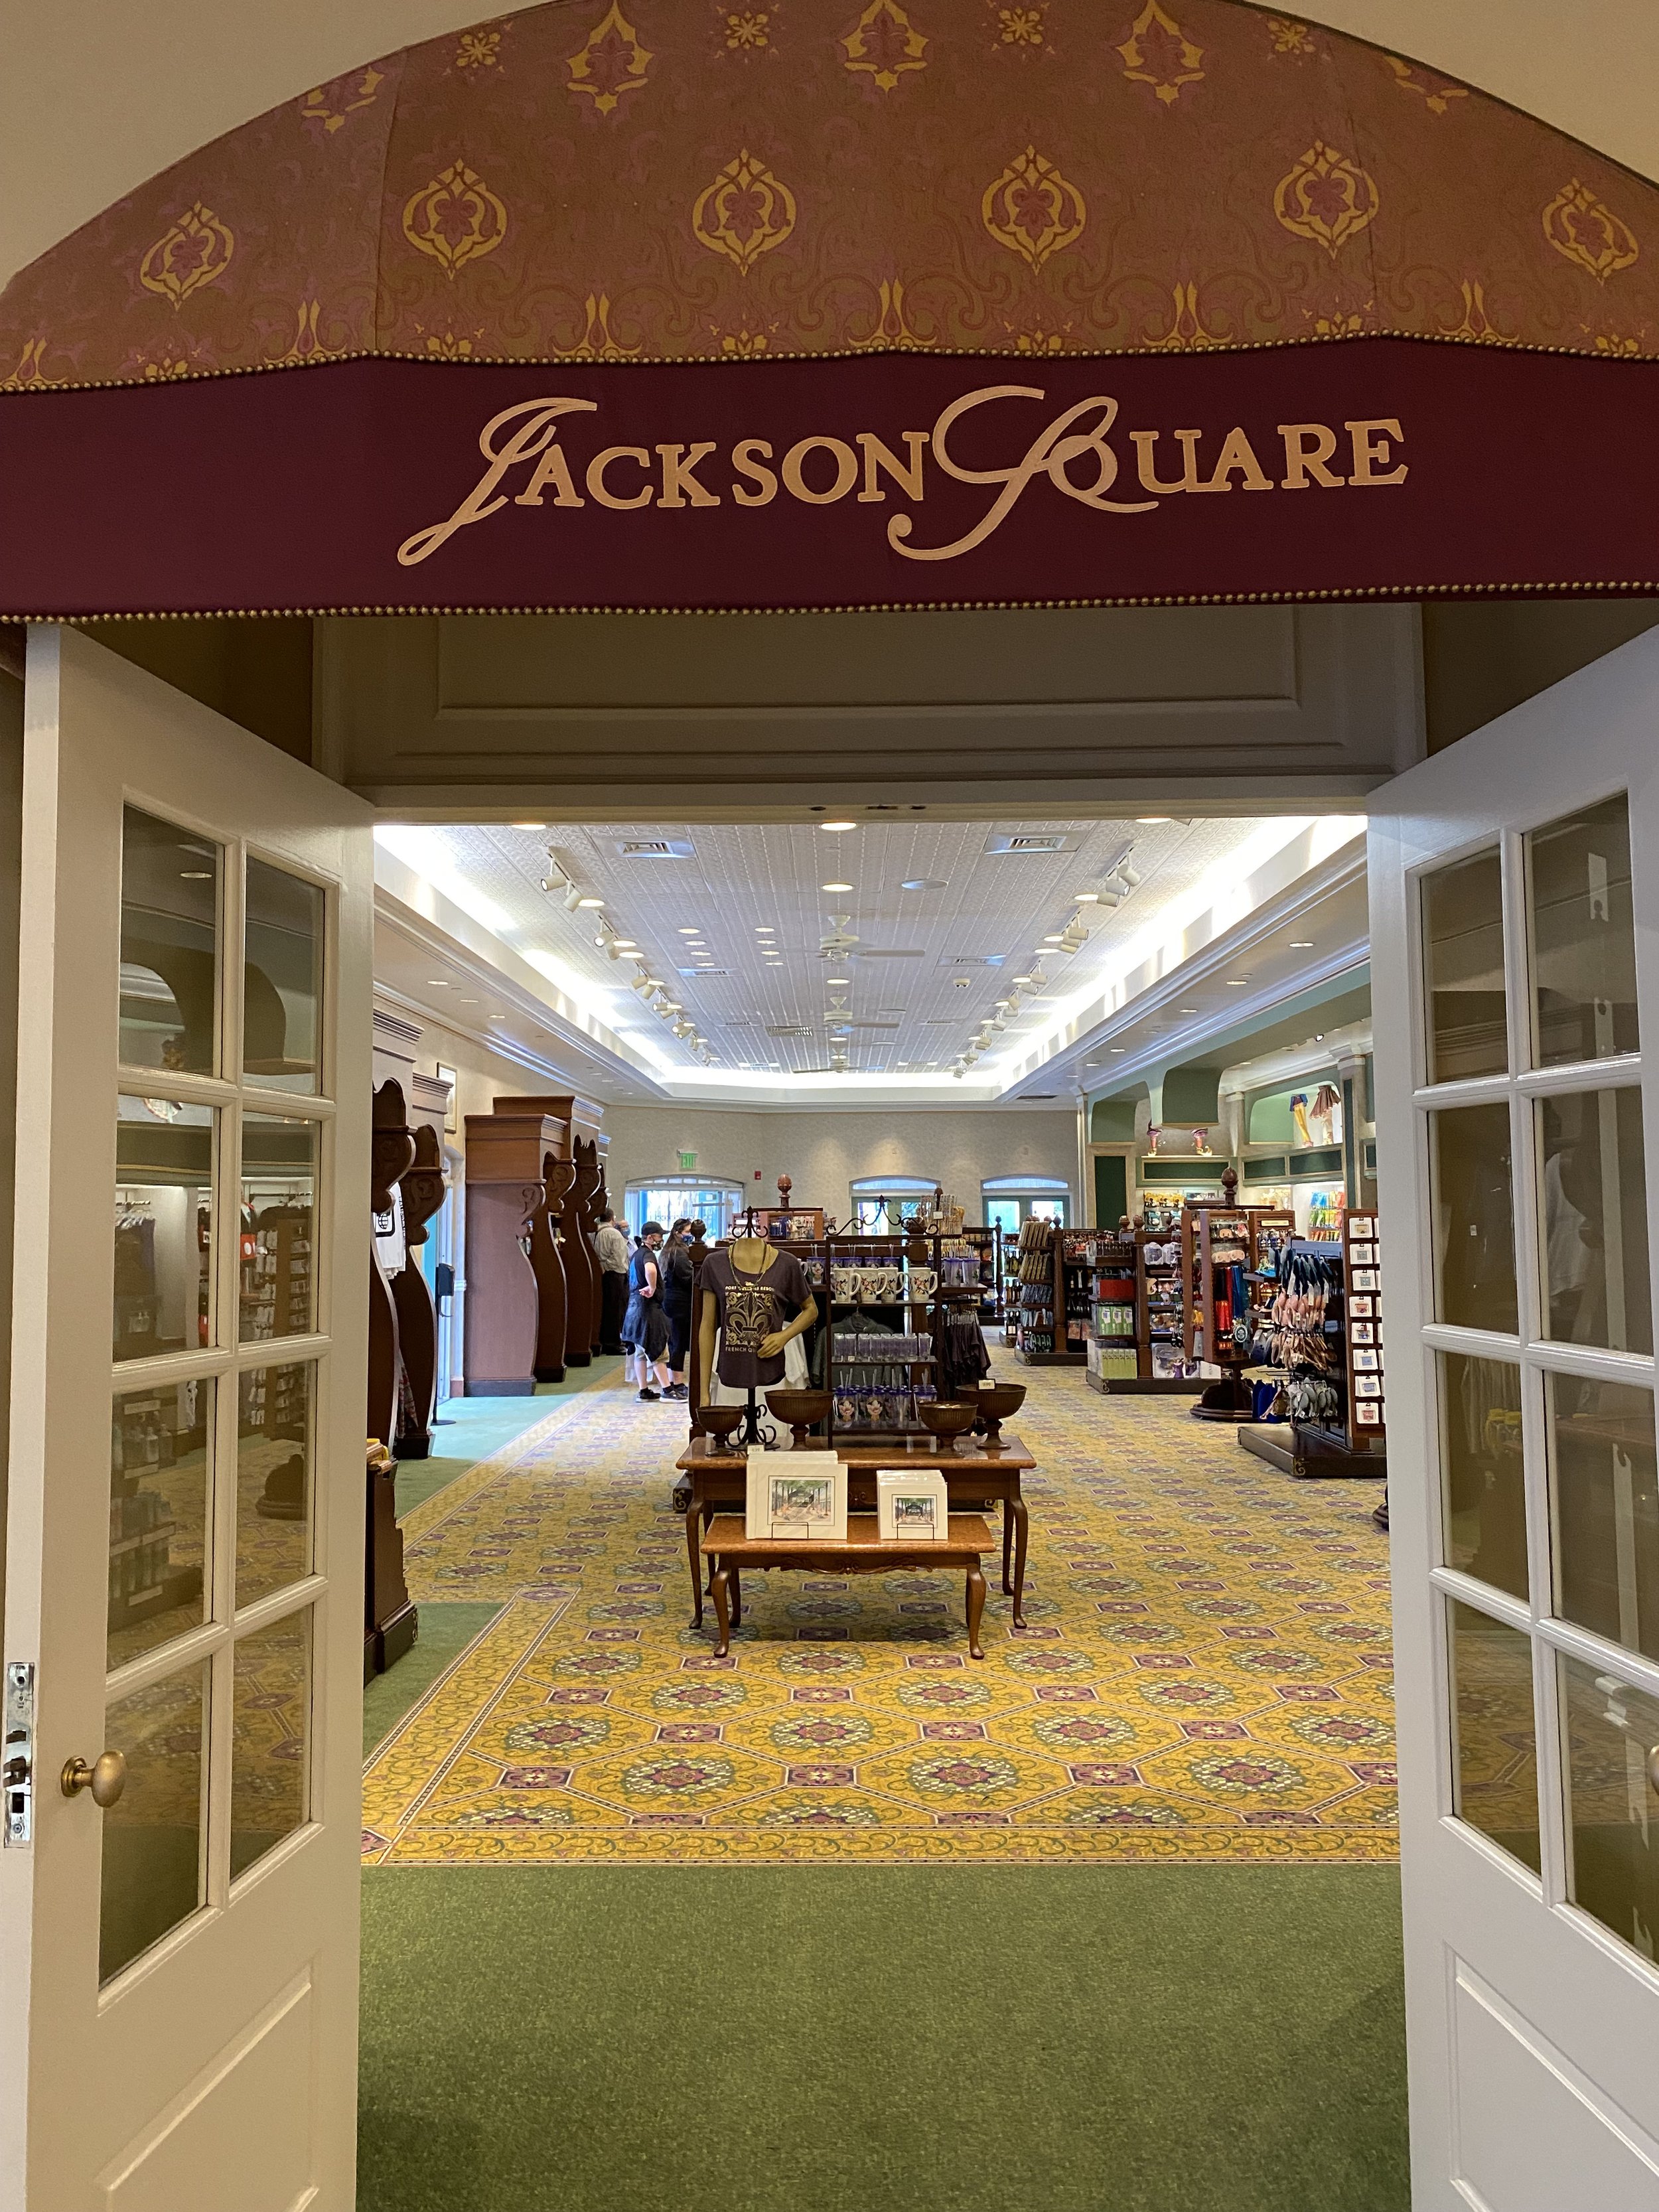  Jackson Square gifts is just off the lobby.  